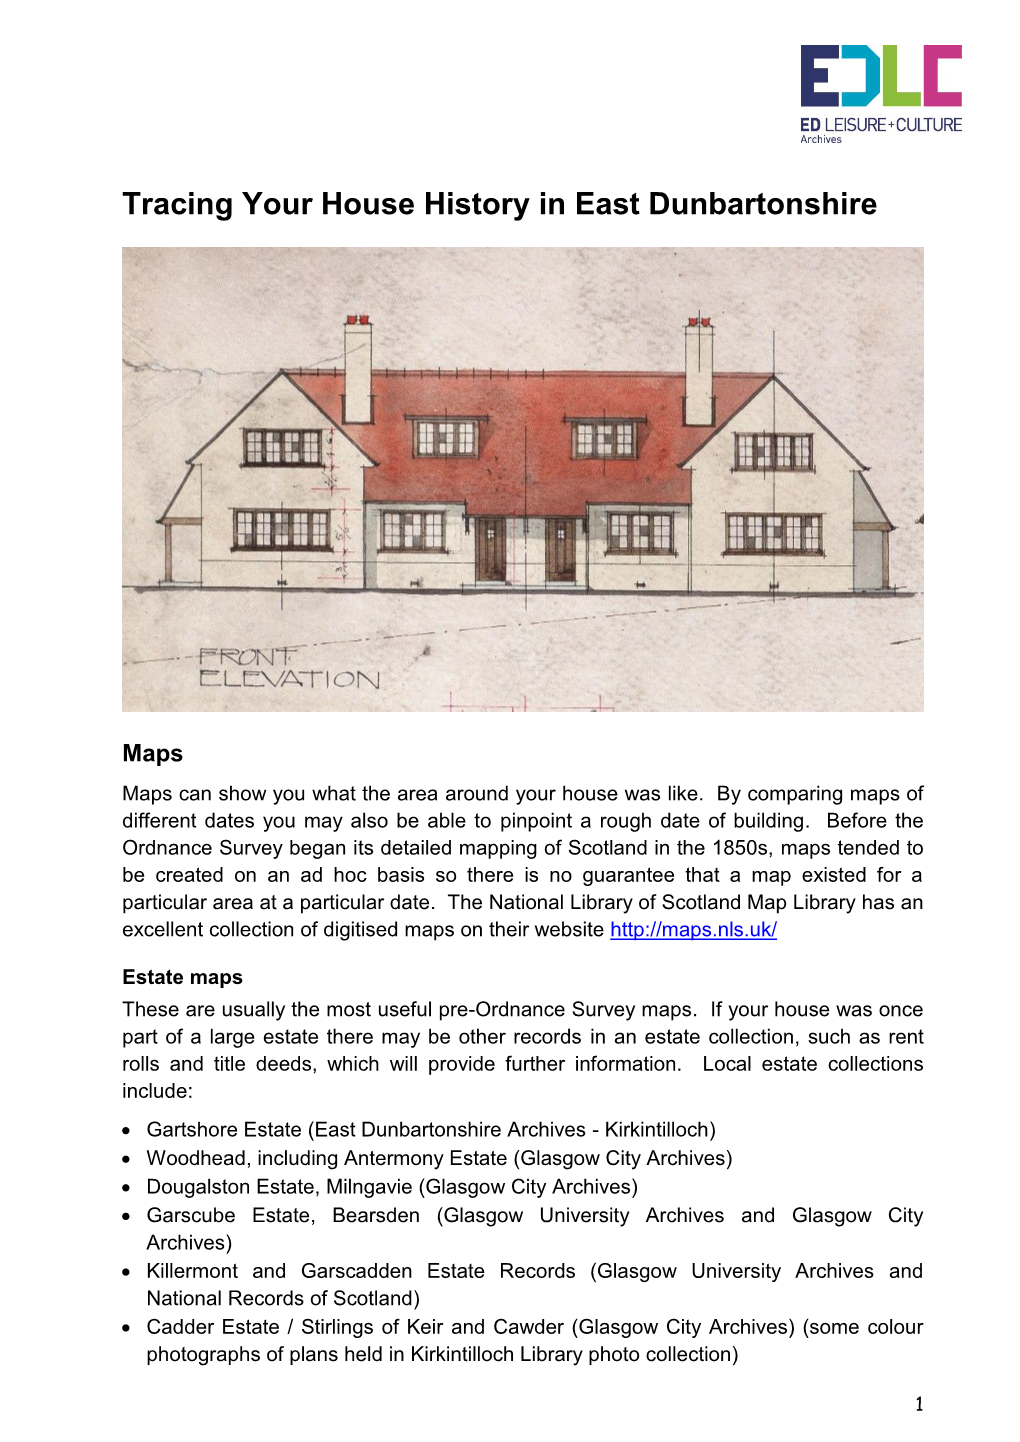 Tracing Your House History in East Dunbartonshire